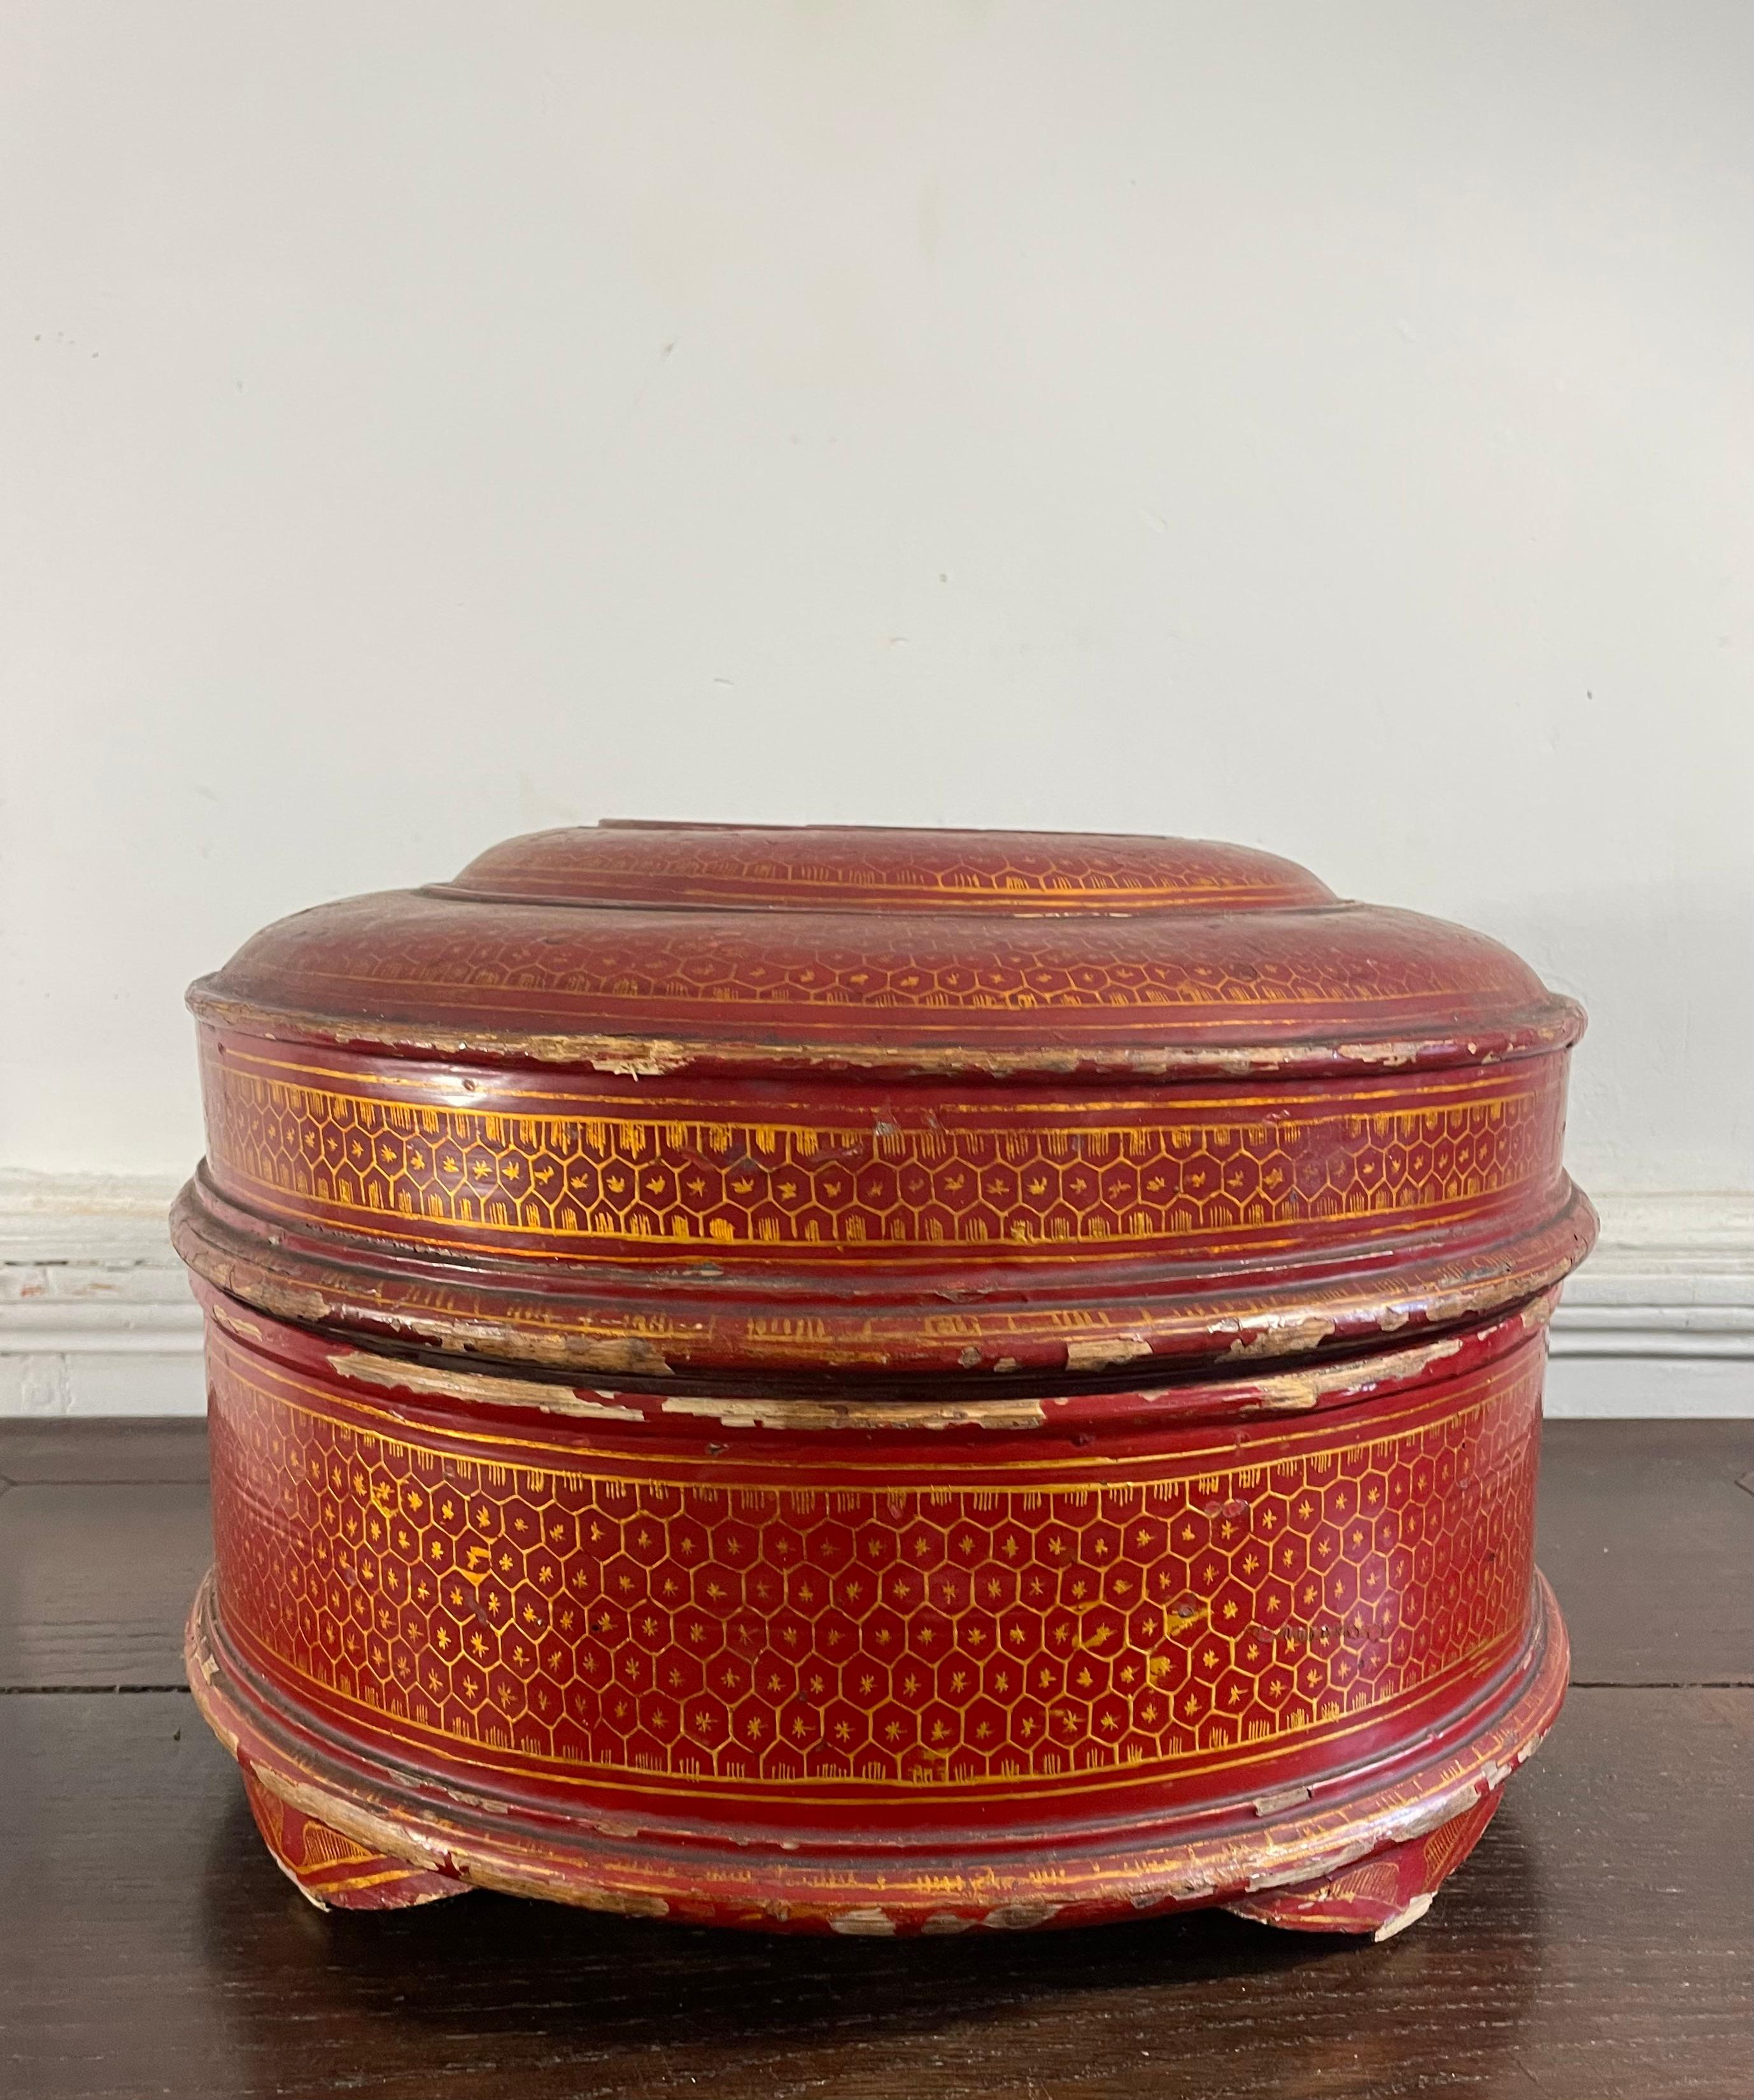 Magnificent round box in red lacquer in two parts.
Completely decorated by hand. With gilded, gold decoration.
There are floral and geometric decorations, handmade interlacing, with gold leaf.
The box is placed on 4 feet.
The interior is lacquered